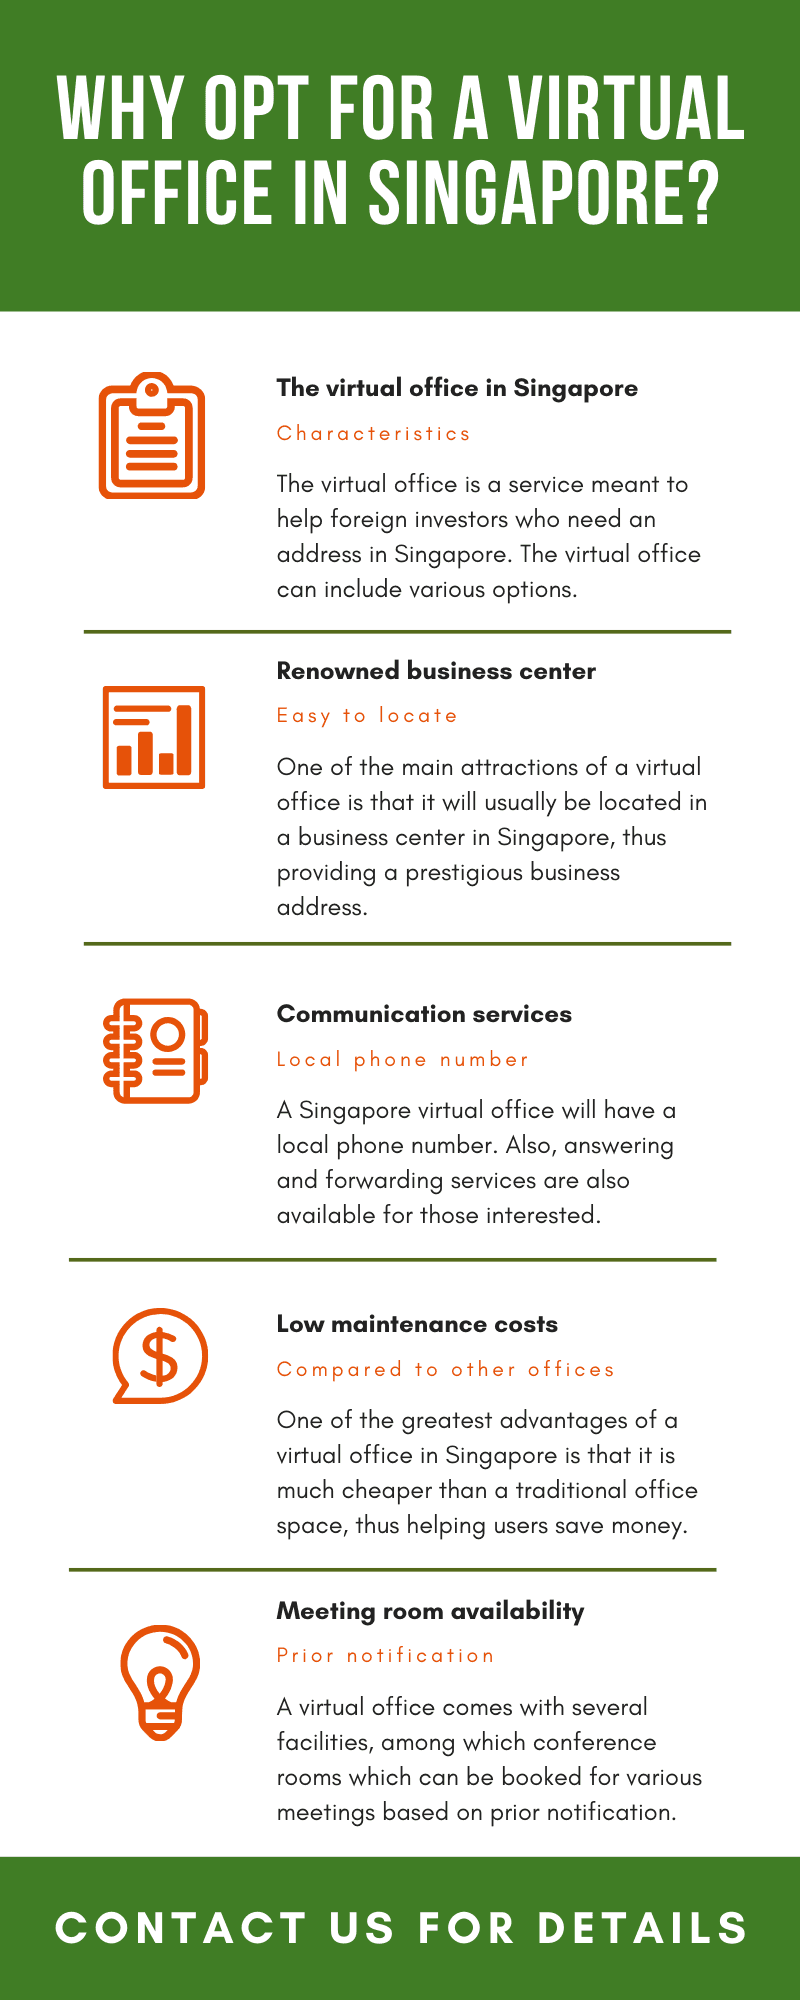 Why-opt-for-a-virtual-office-in-Singapore.png